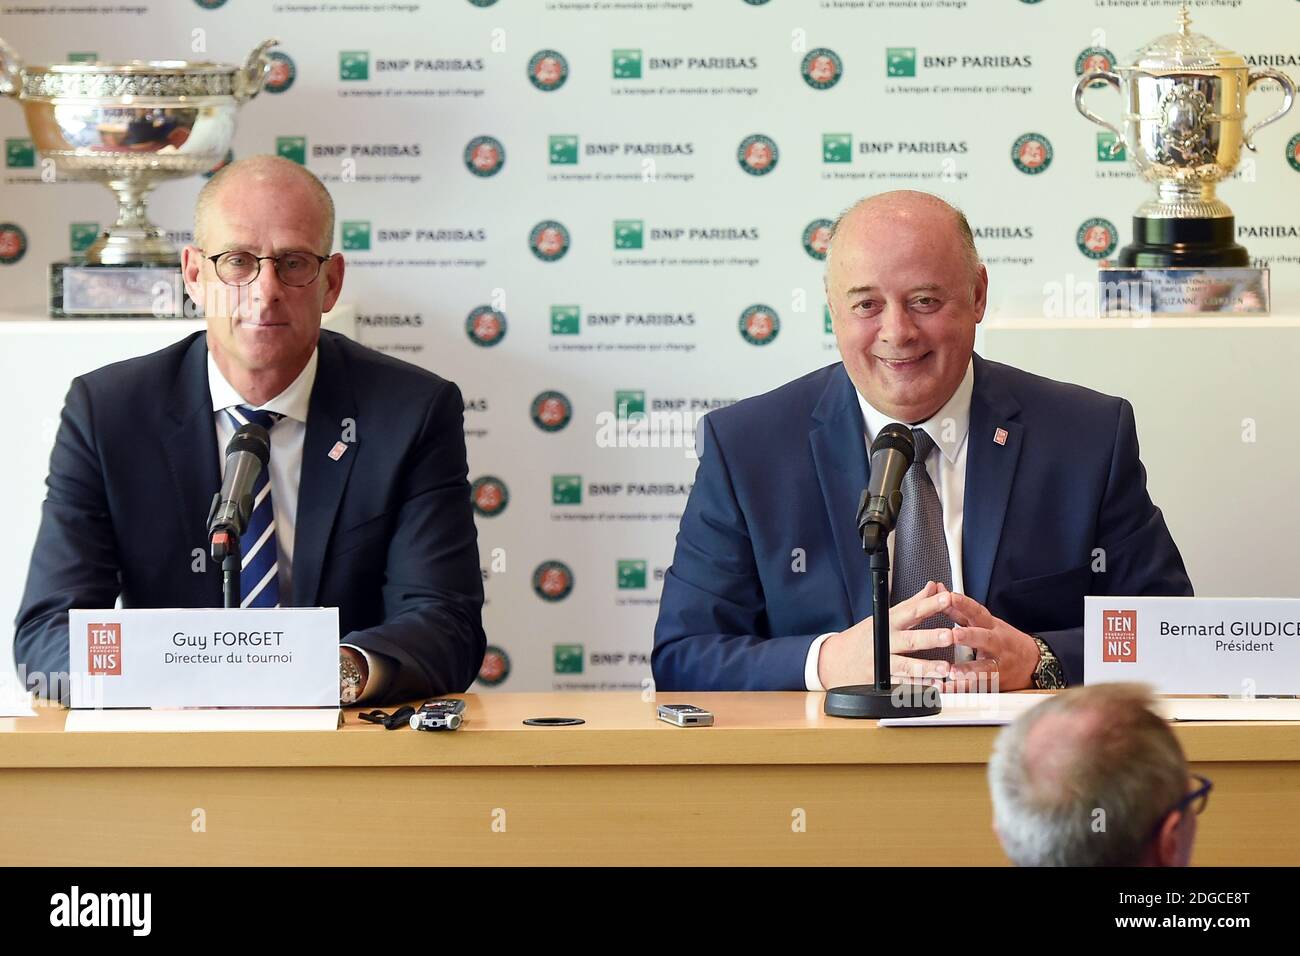 President of French Tennis Federation (FFT) Bernard Guidicelli and director  Guy Forget attend the press conference launching Roland Garros 2017 at the  Tennis French Federation on April 26, 2017 in Paris. Photo